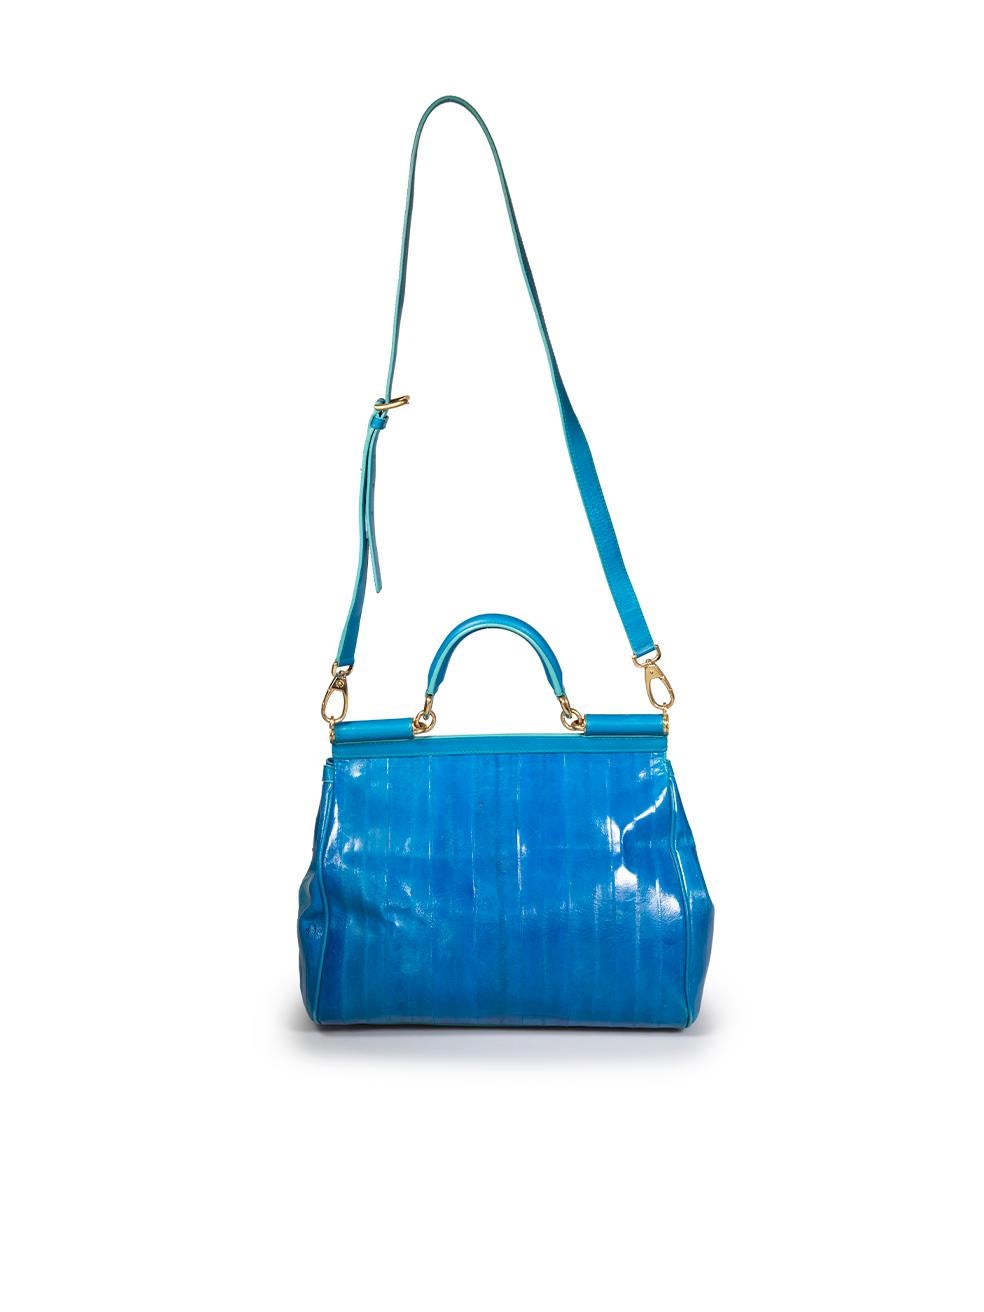 Dolce & Gabbana Blue Eel Leather Miss Sicily Bag In Good Condition For Sale In London, GB